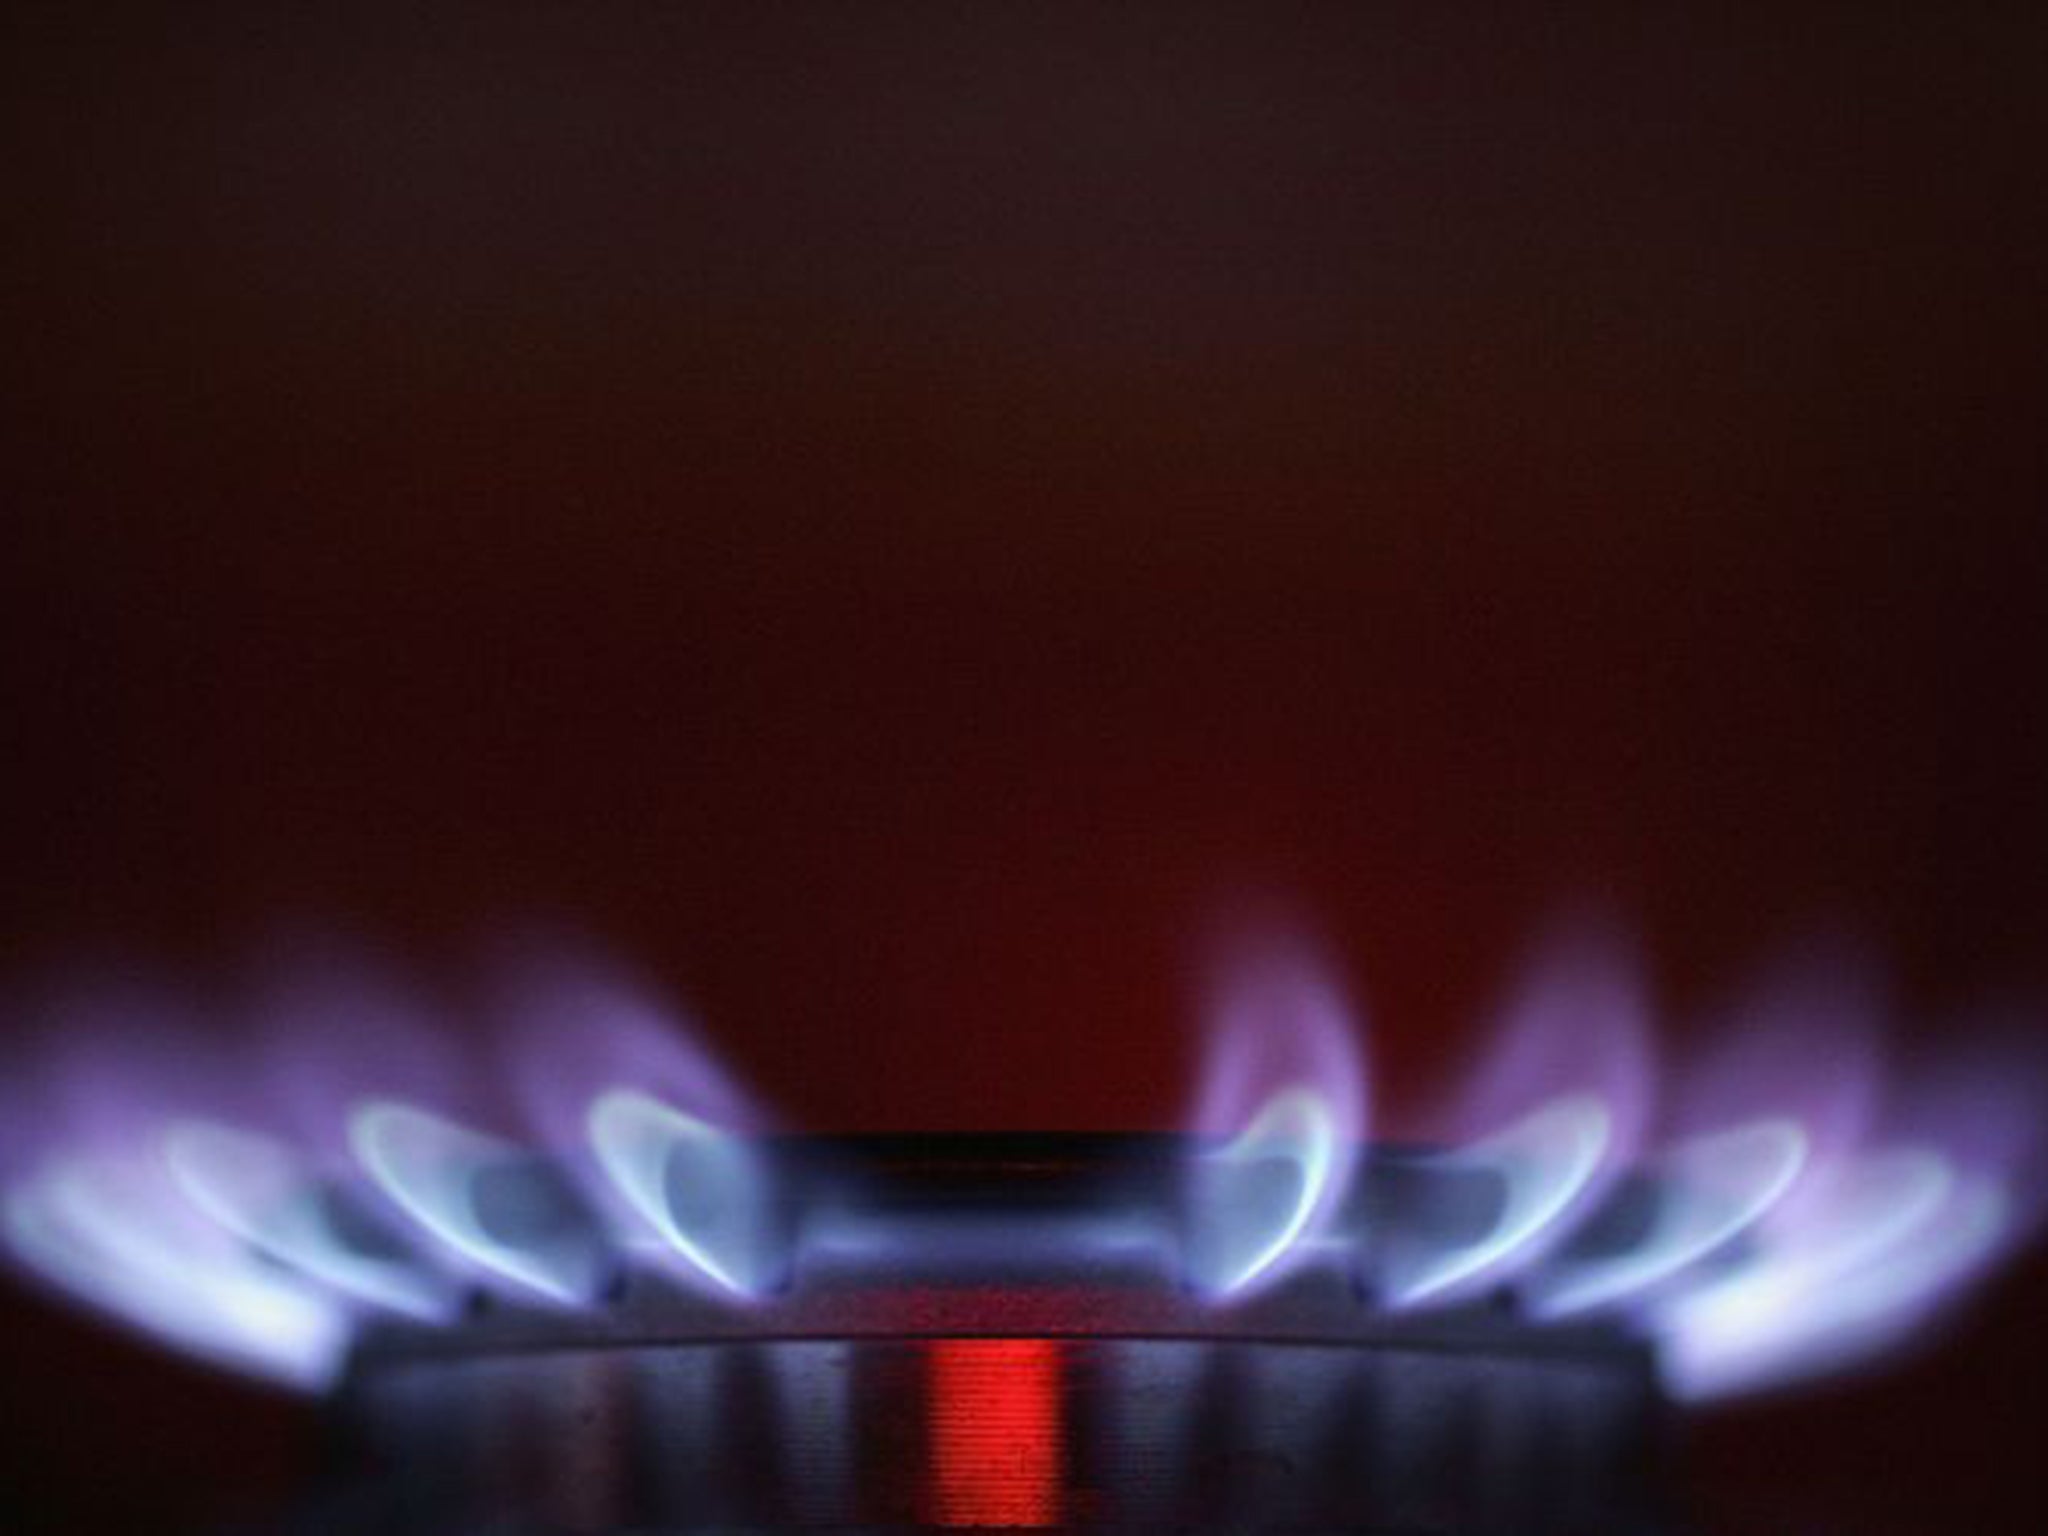 Switching energy suppliers can save some bill-payers more than £300 a year in energy costs